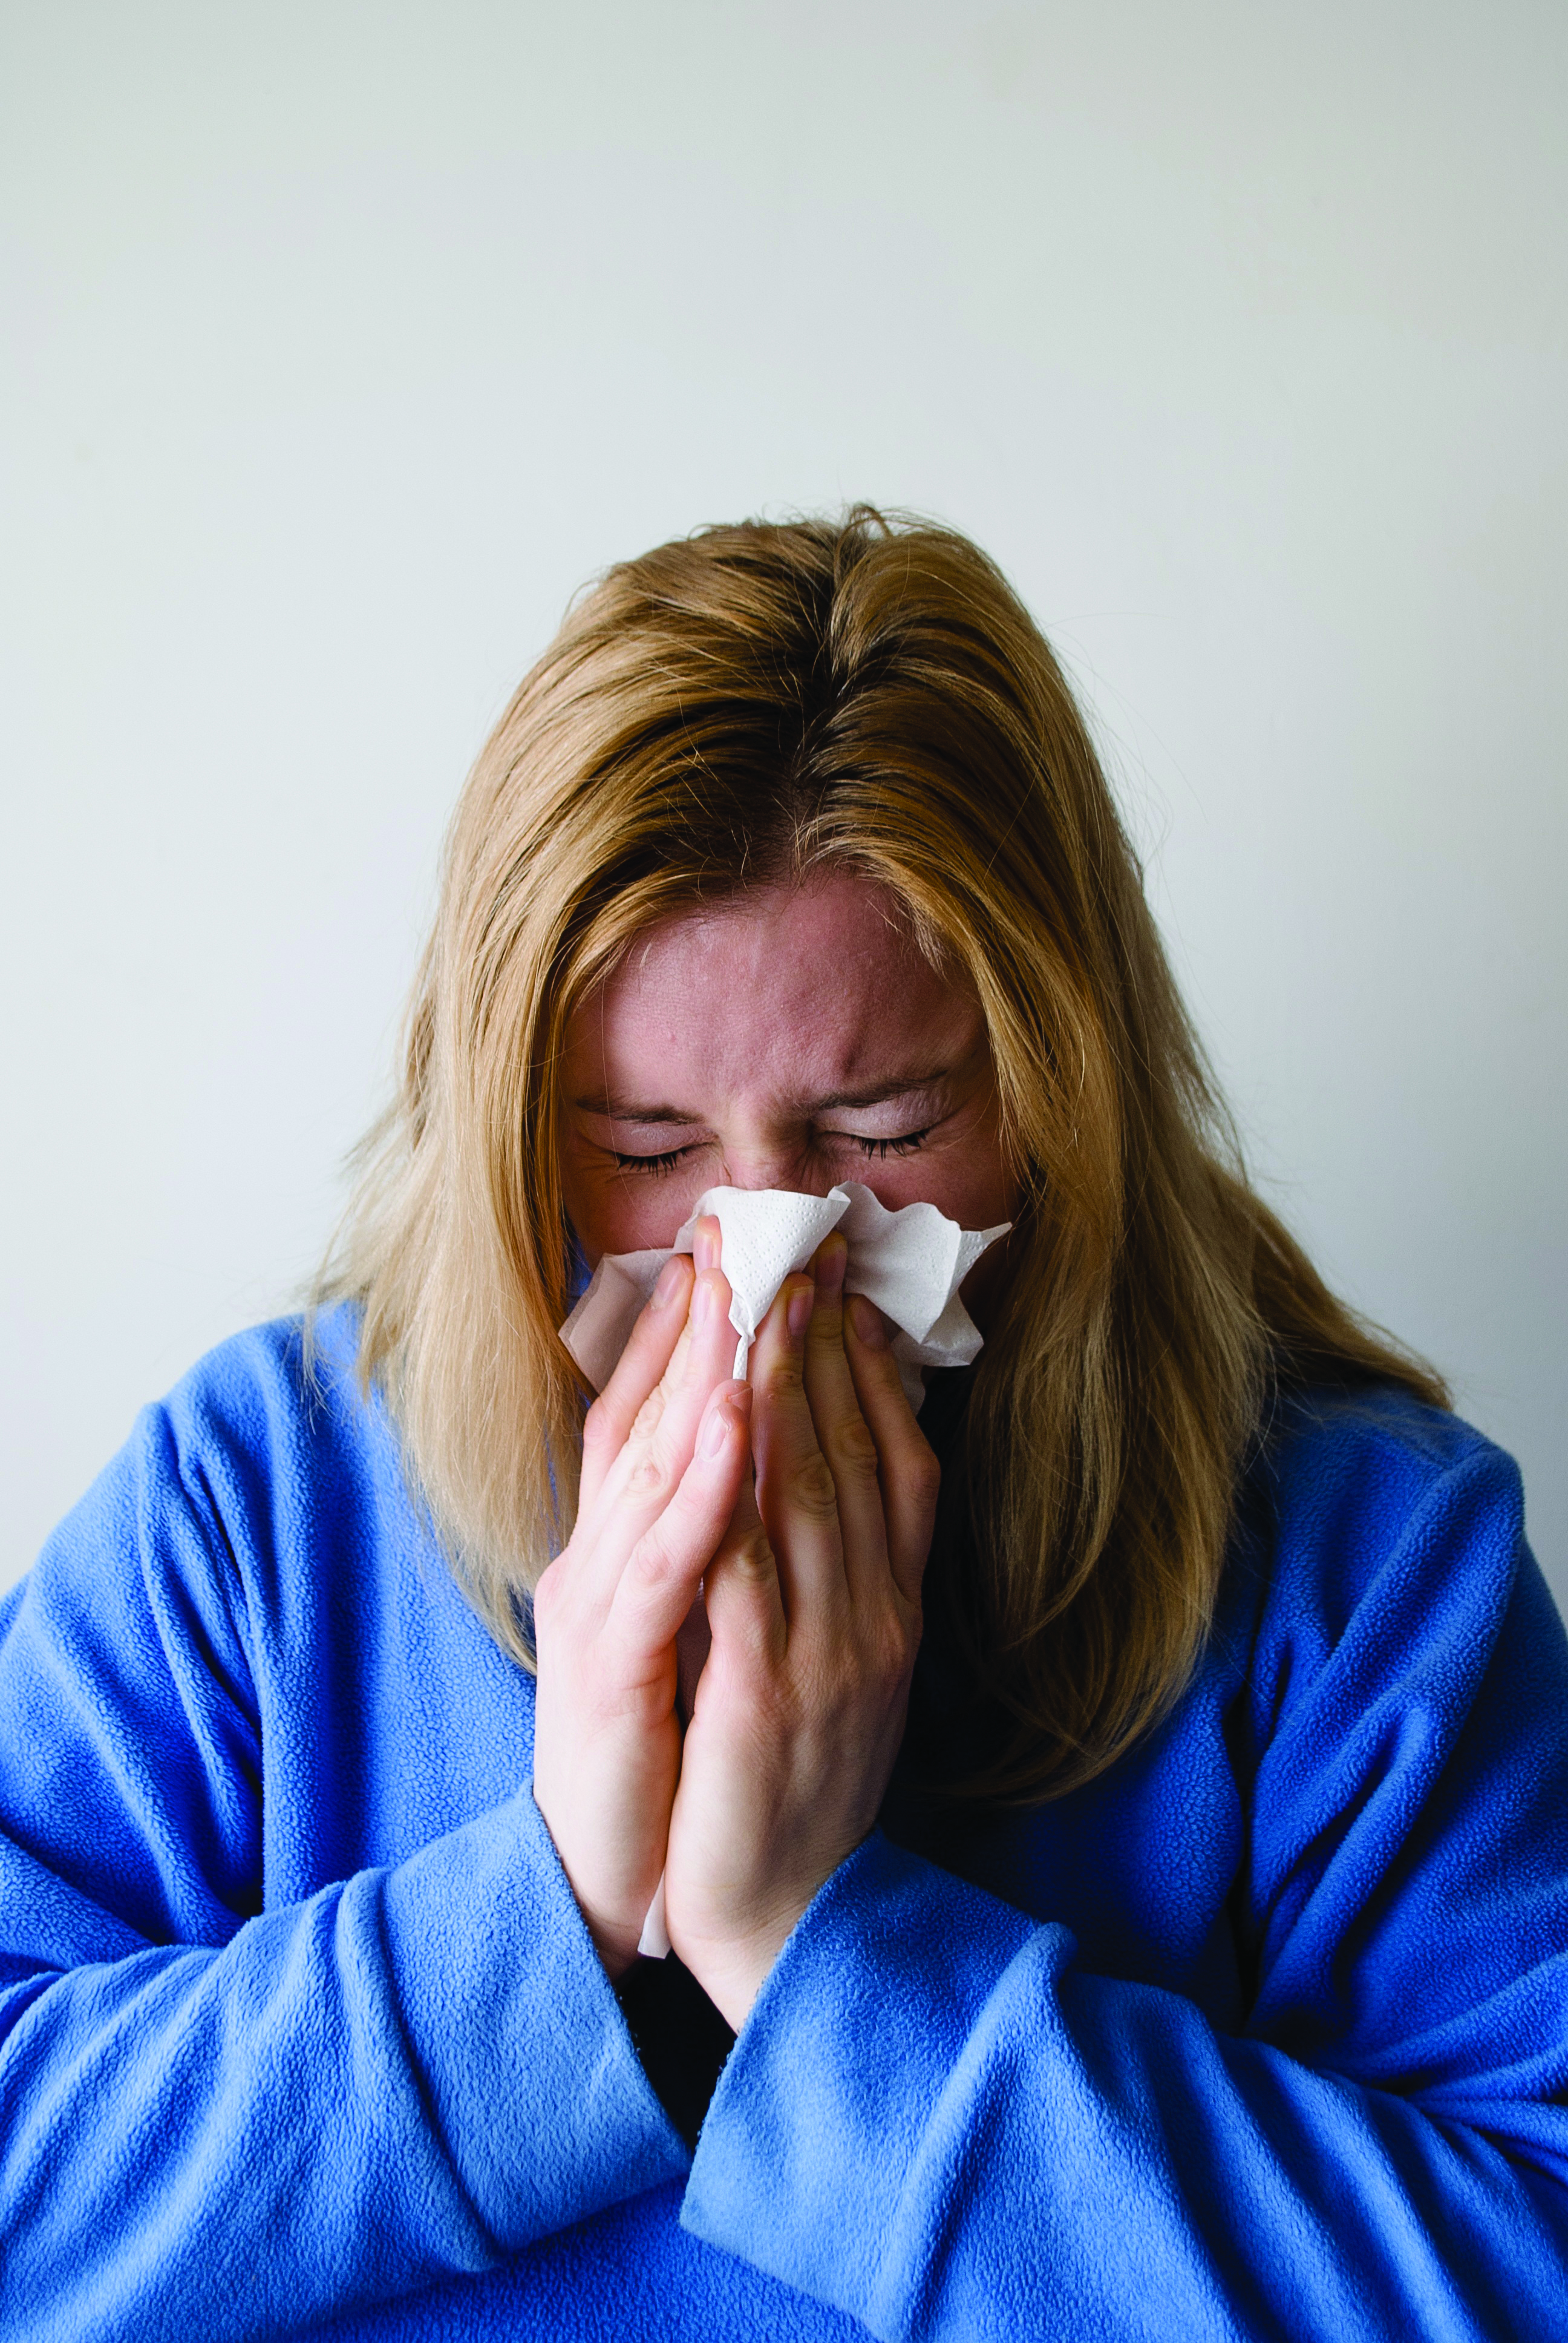 What can you do to help avoid the flu? By Dr. Veronique LaRocco